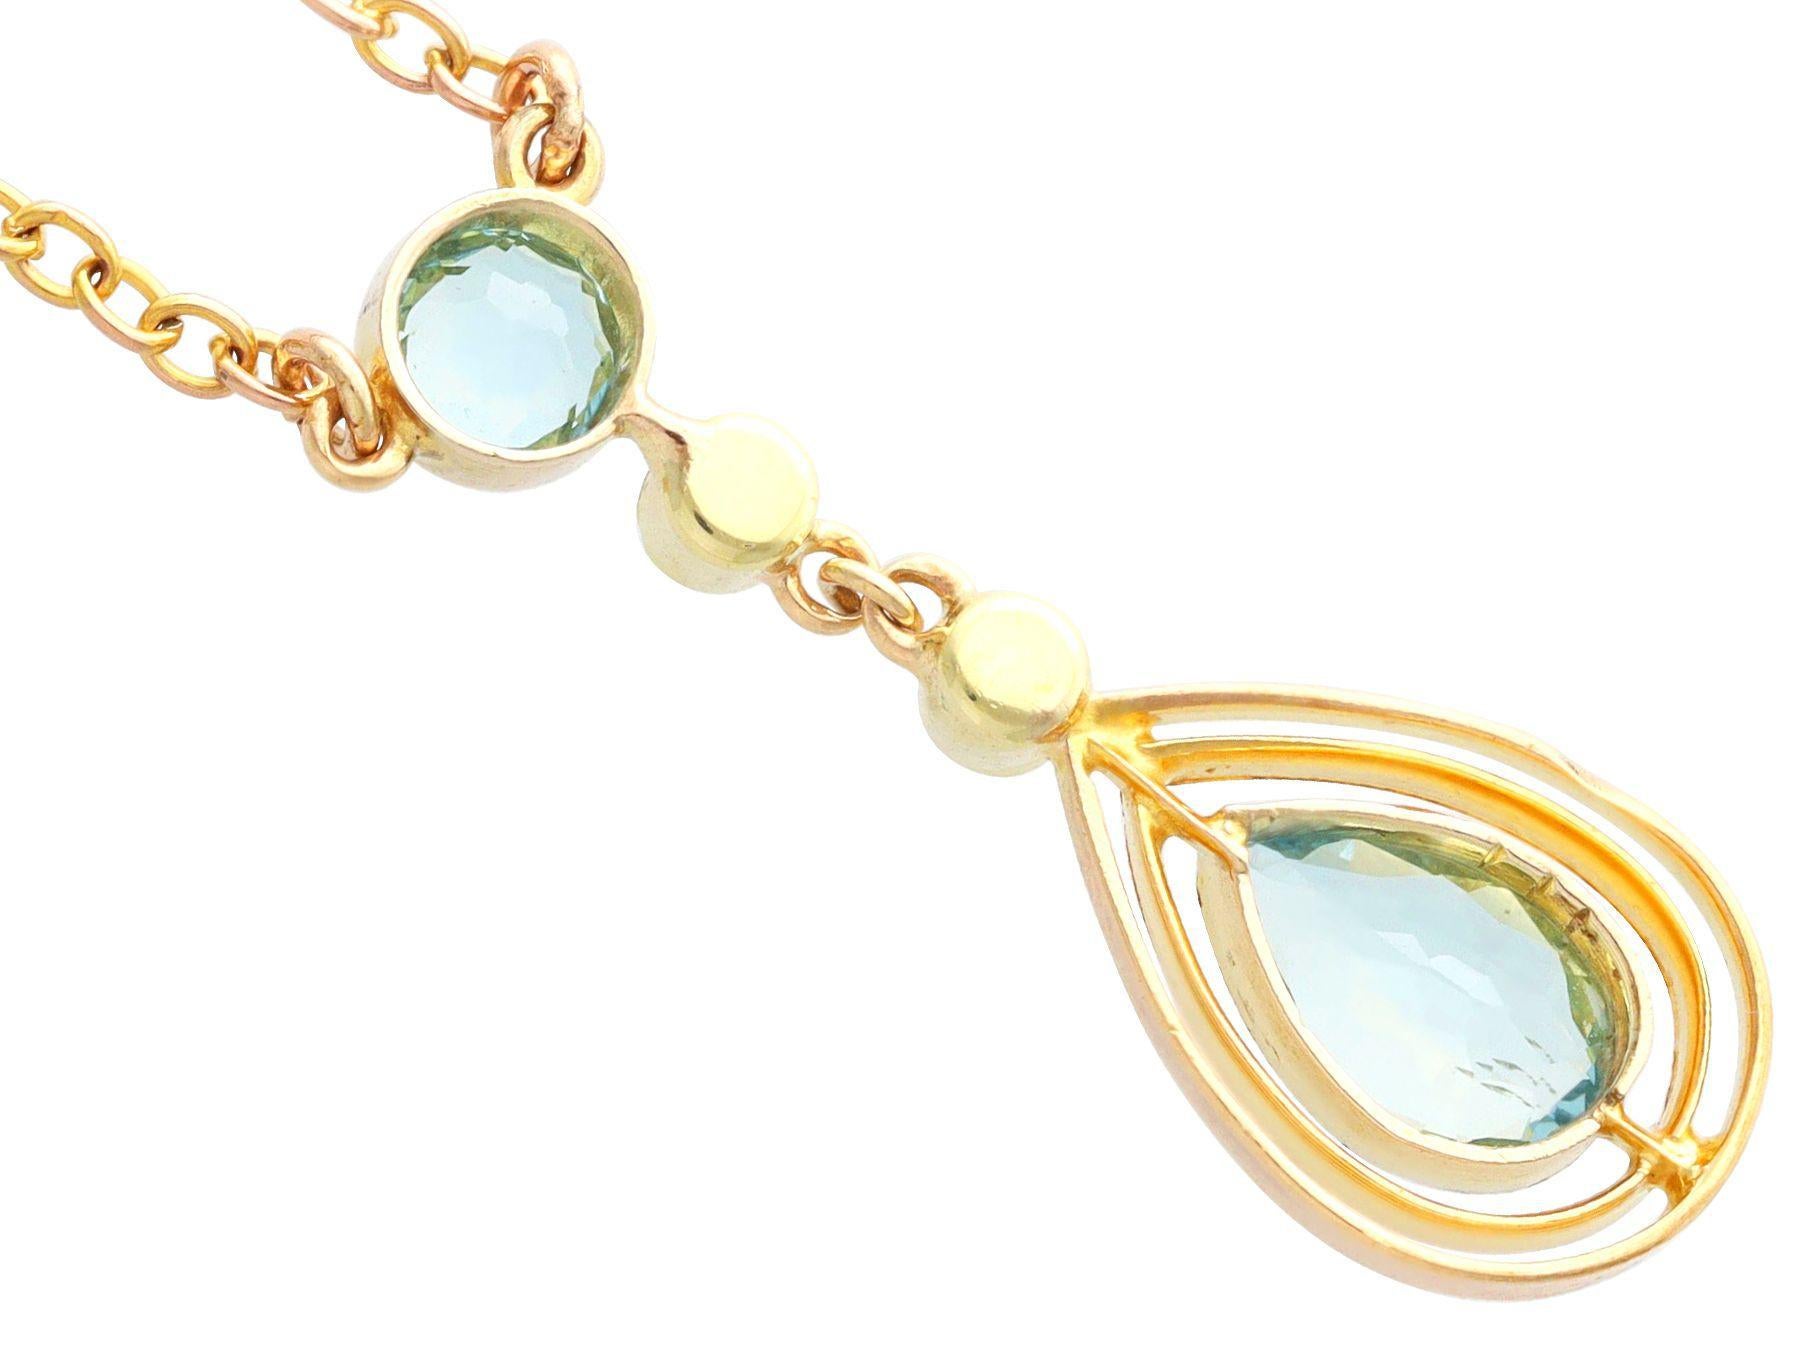 Women's or Men's Antique 1.13 Carat Aquamarine and Seed Pearl Necklace in Yellow Gold